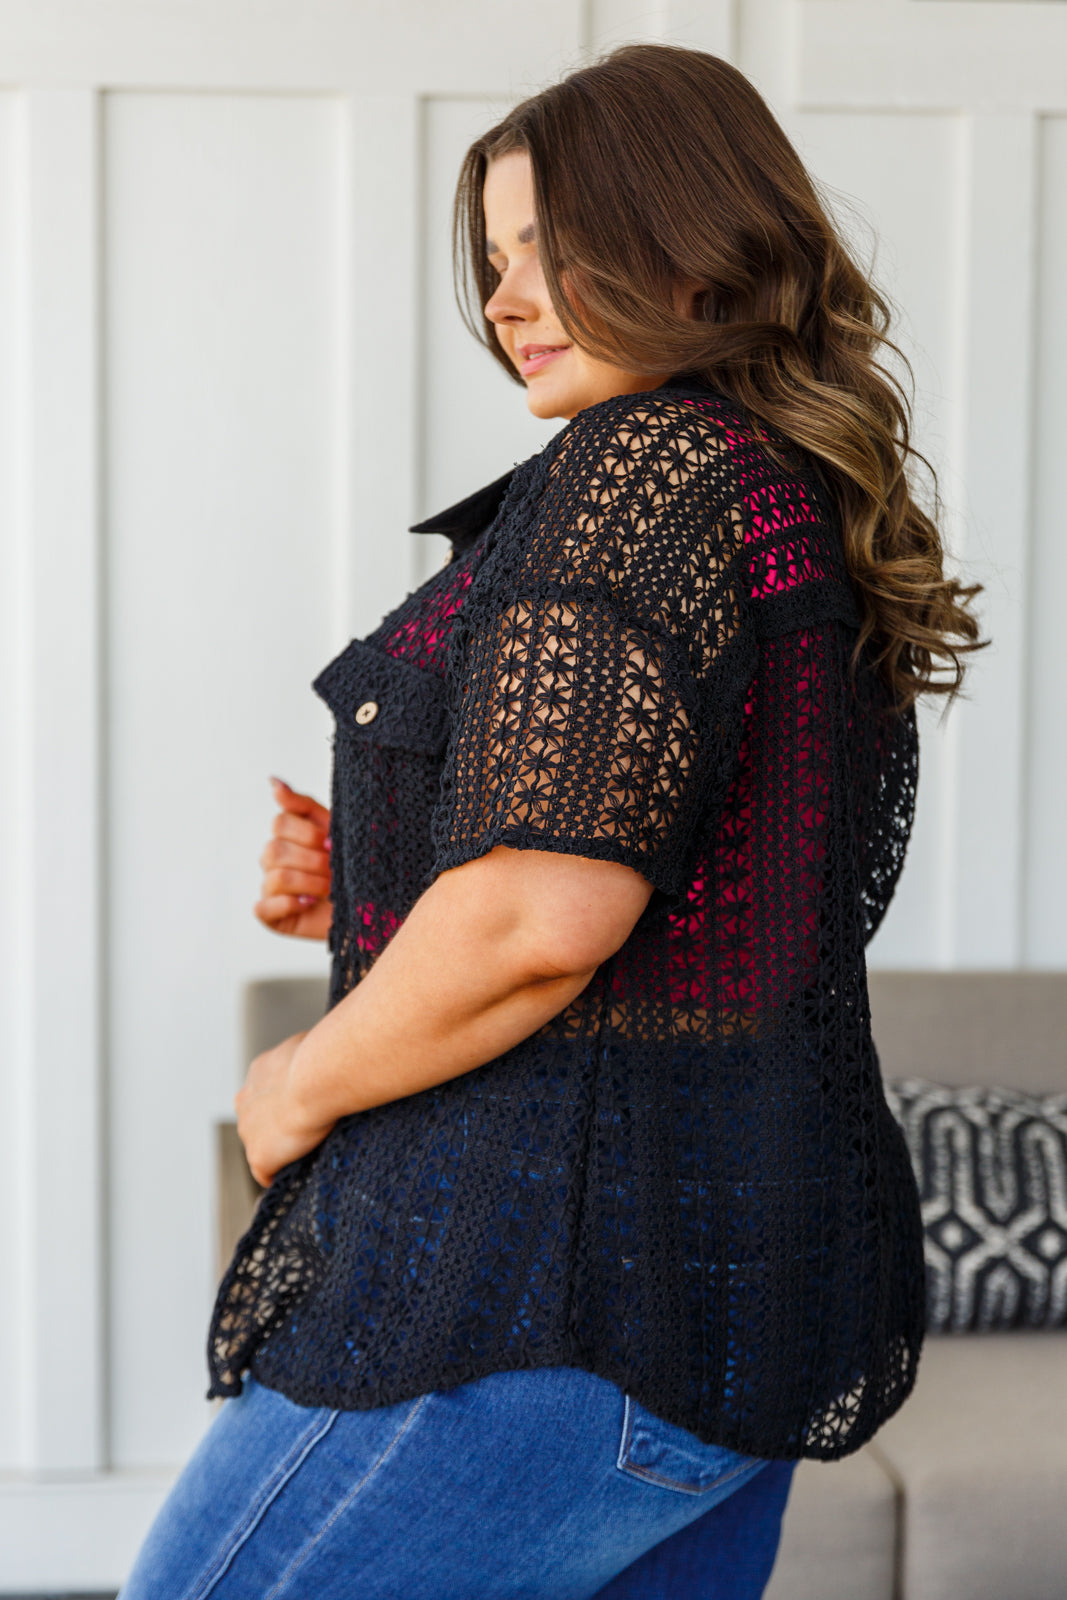 Talk of the Town Lace Set in Black - Southern Divas Boutique